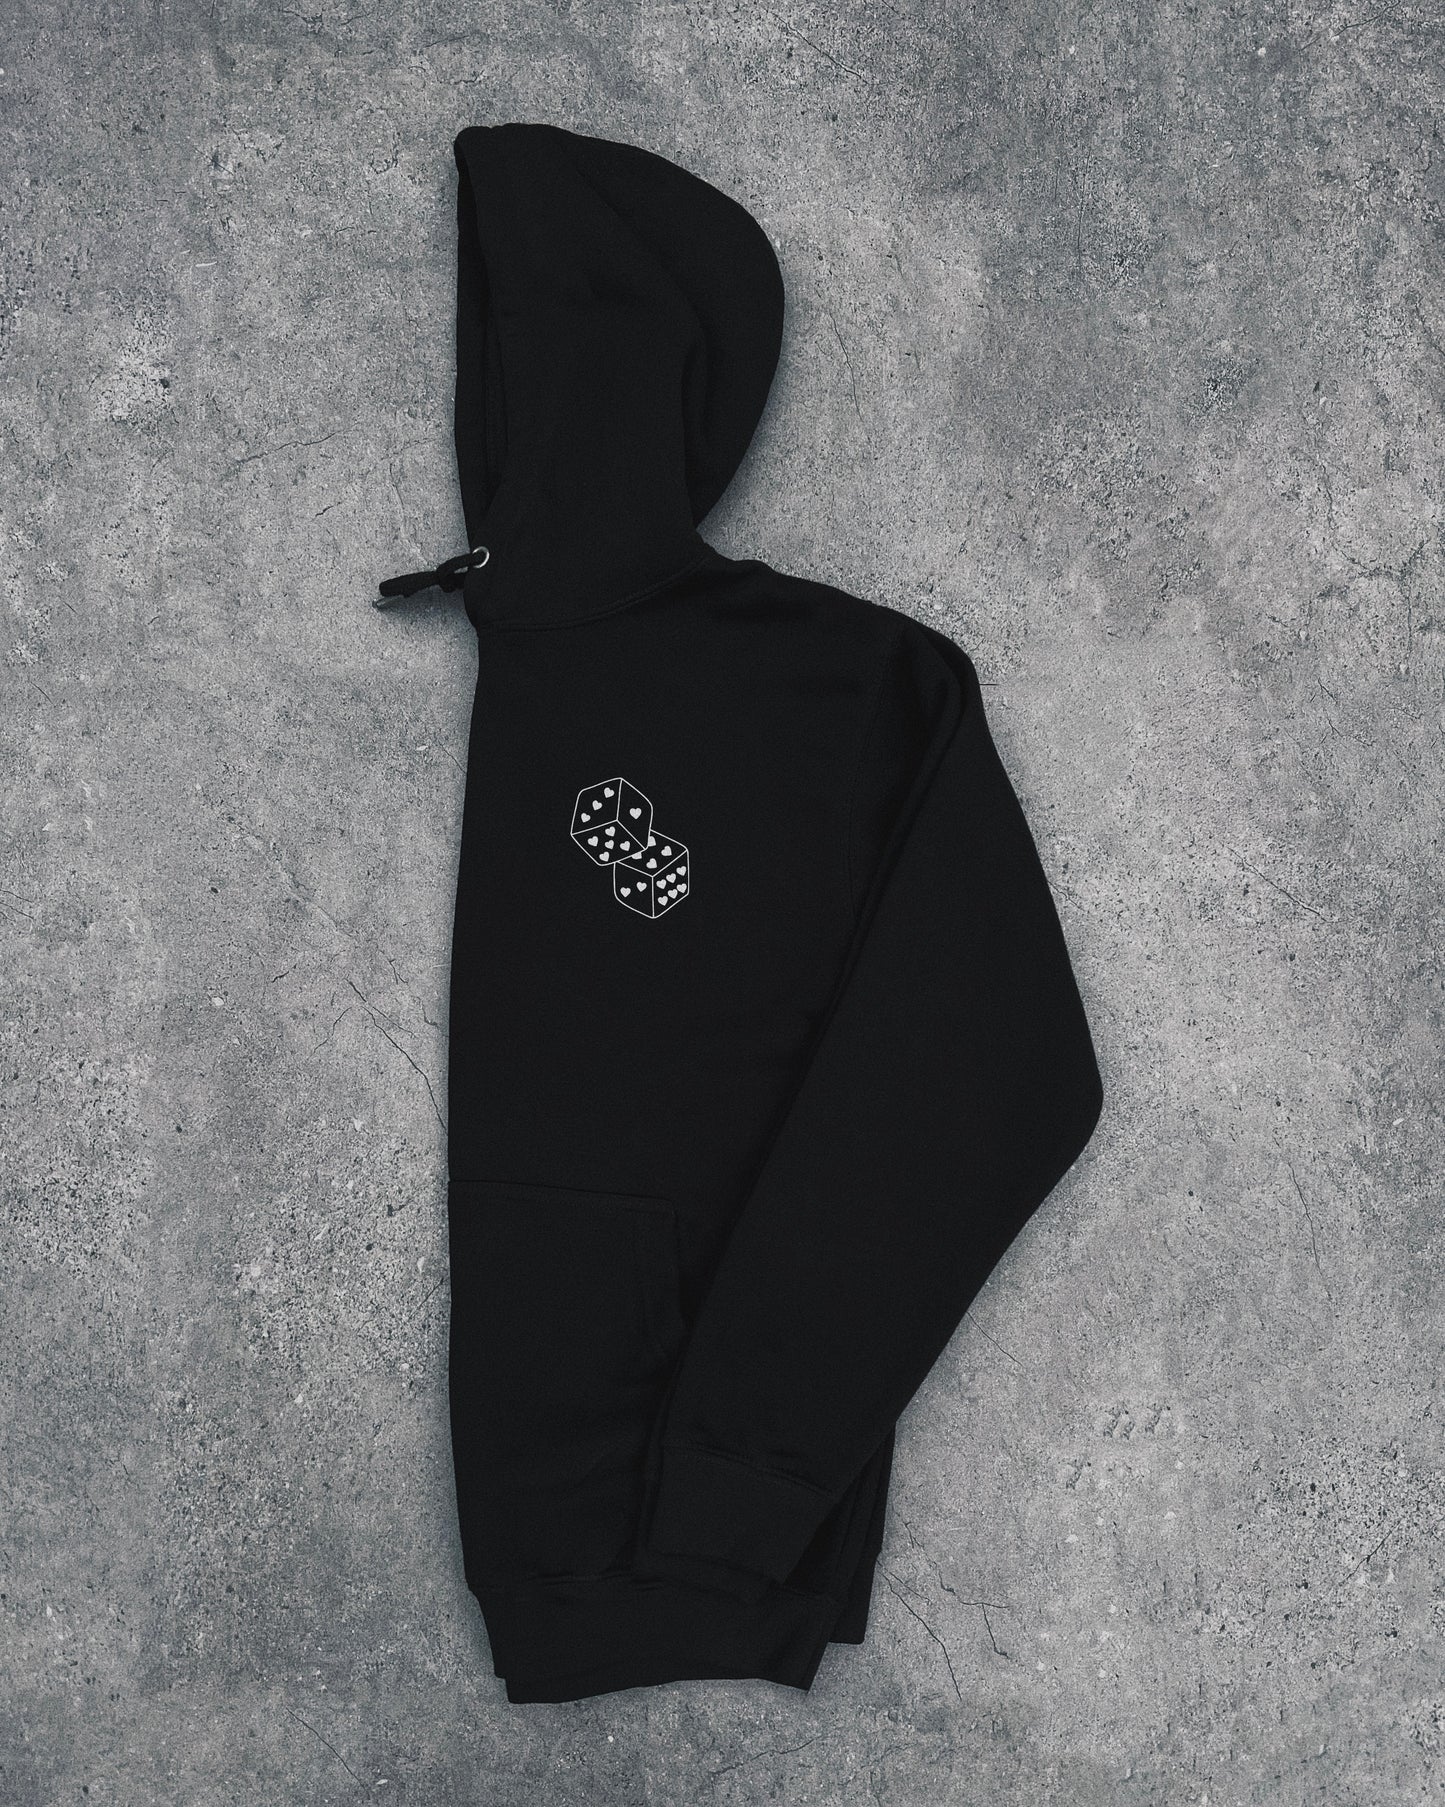 Tough Luck - Pullover Hoodie